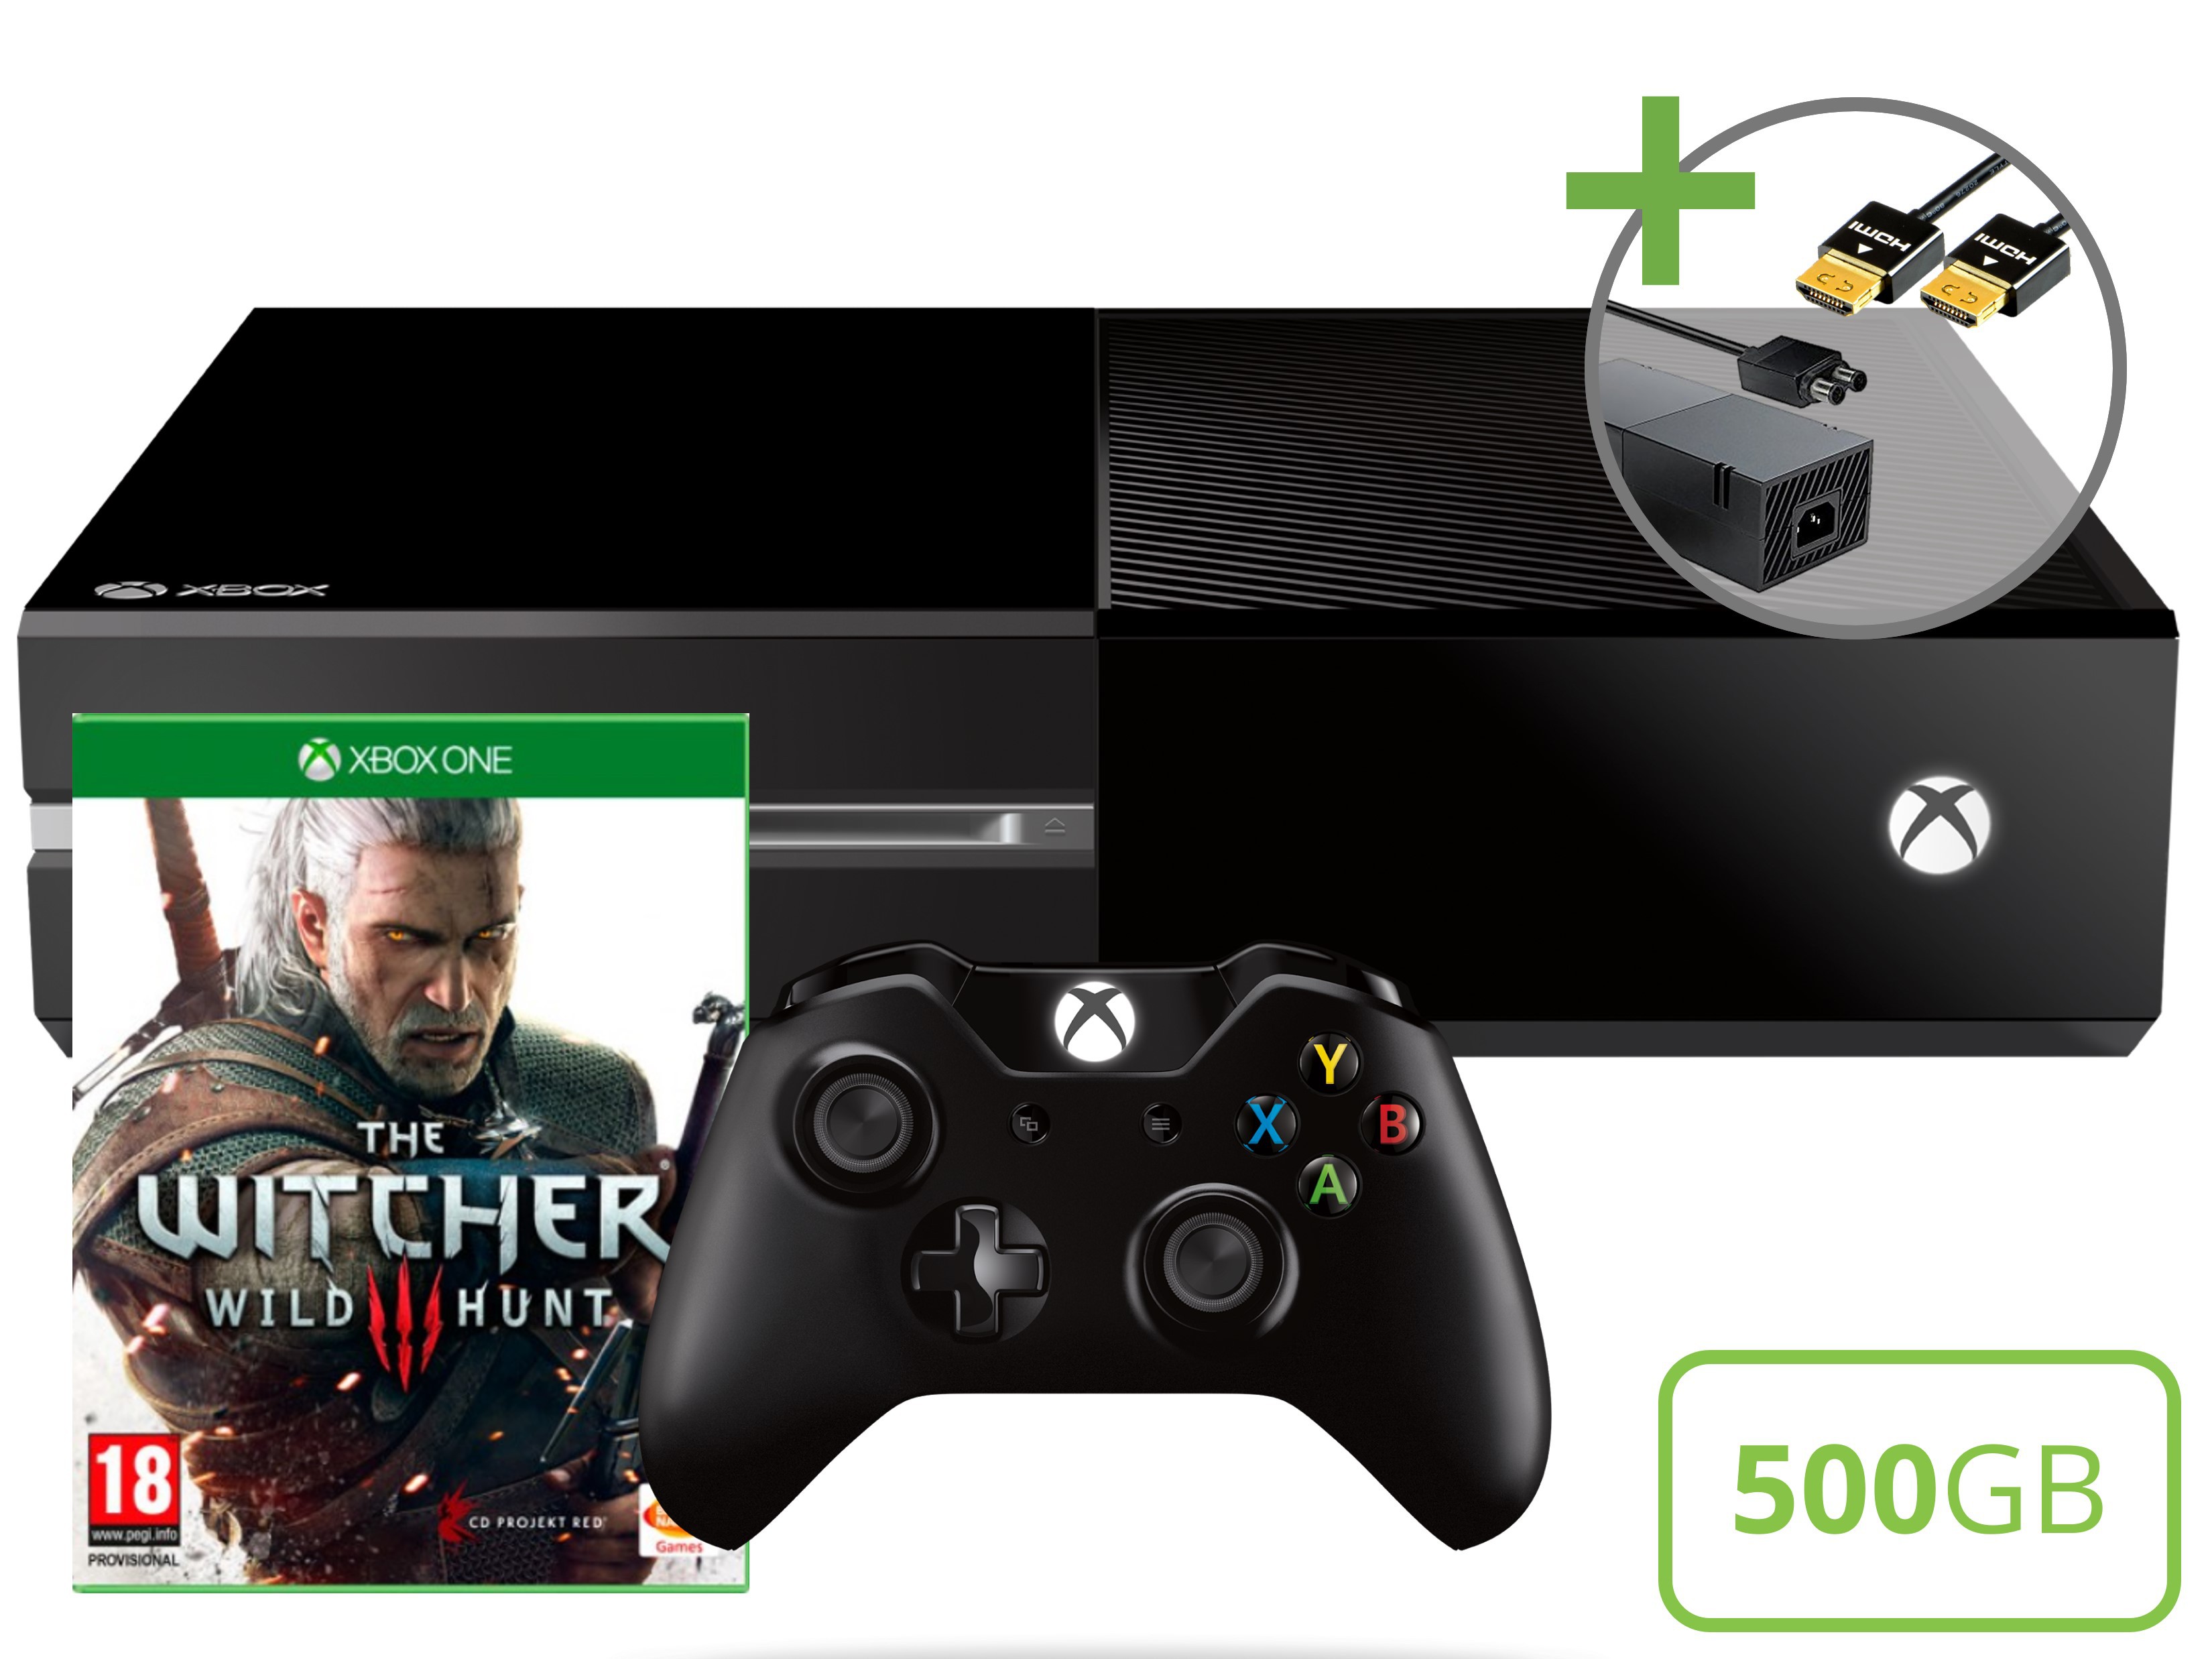 Microsoft Xbox One Starter Pack - 500GB The Witcher 3 Wild Hunt Edition - Xbox One Hardware